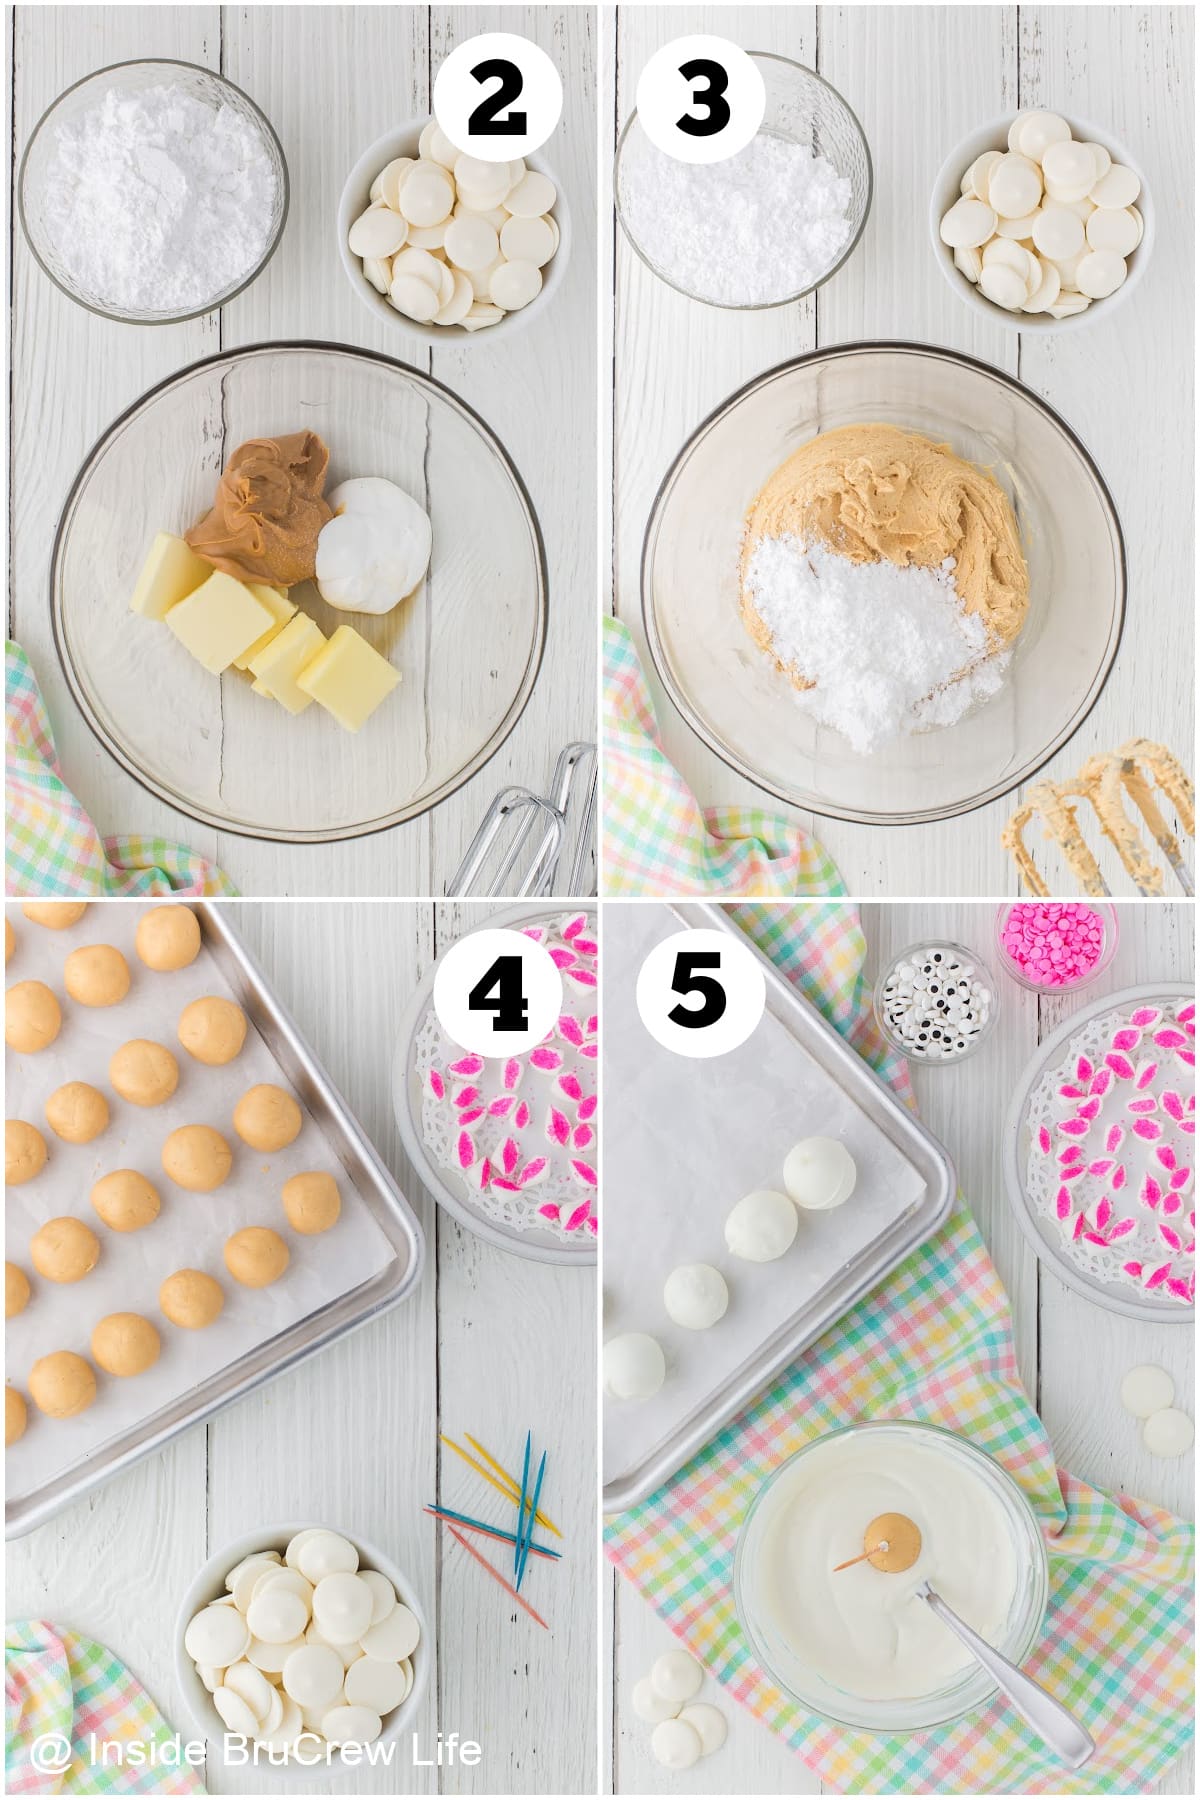 Four pictures showing how to make and dip peanut butter balls.